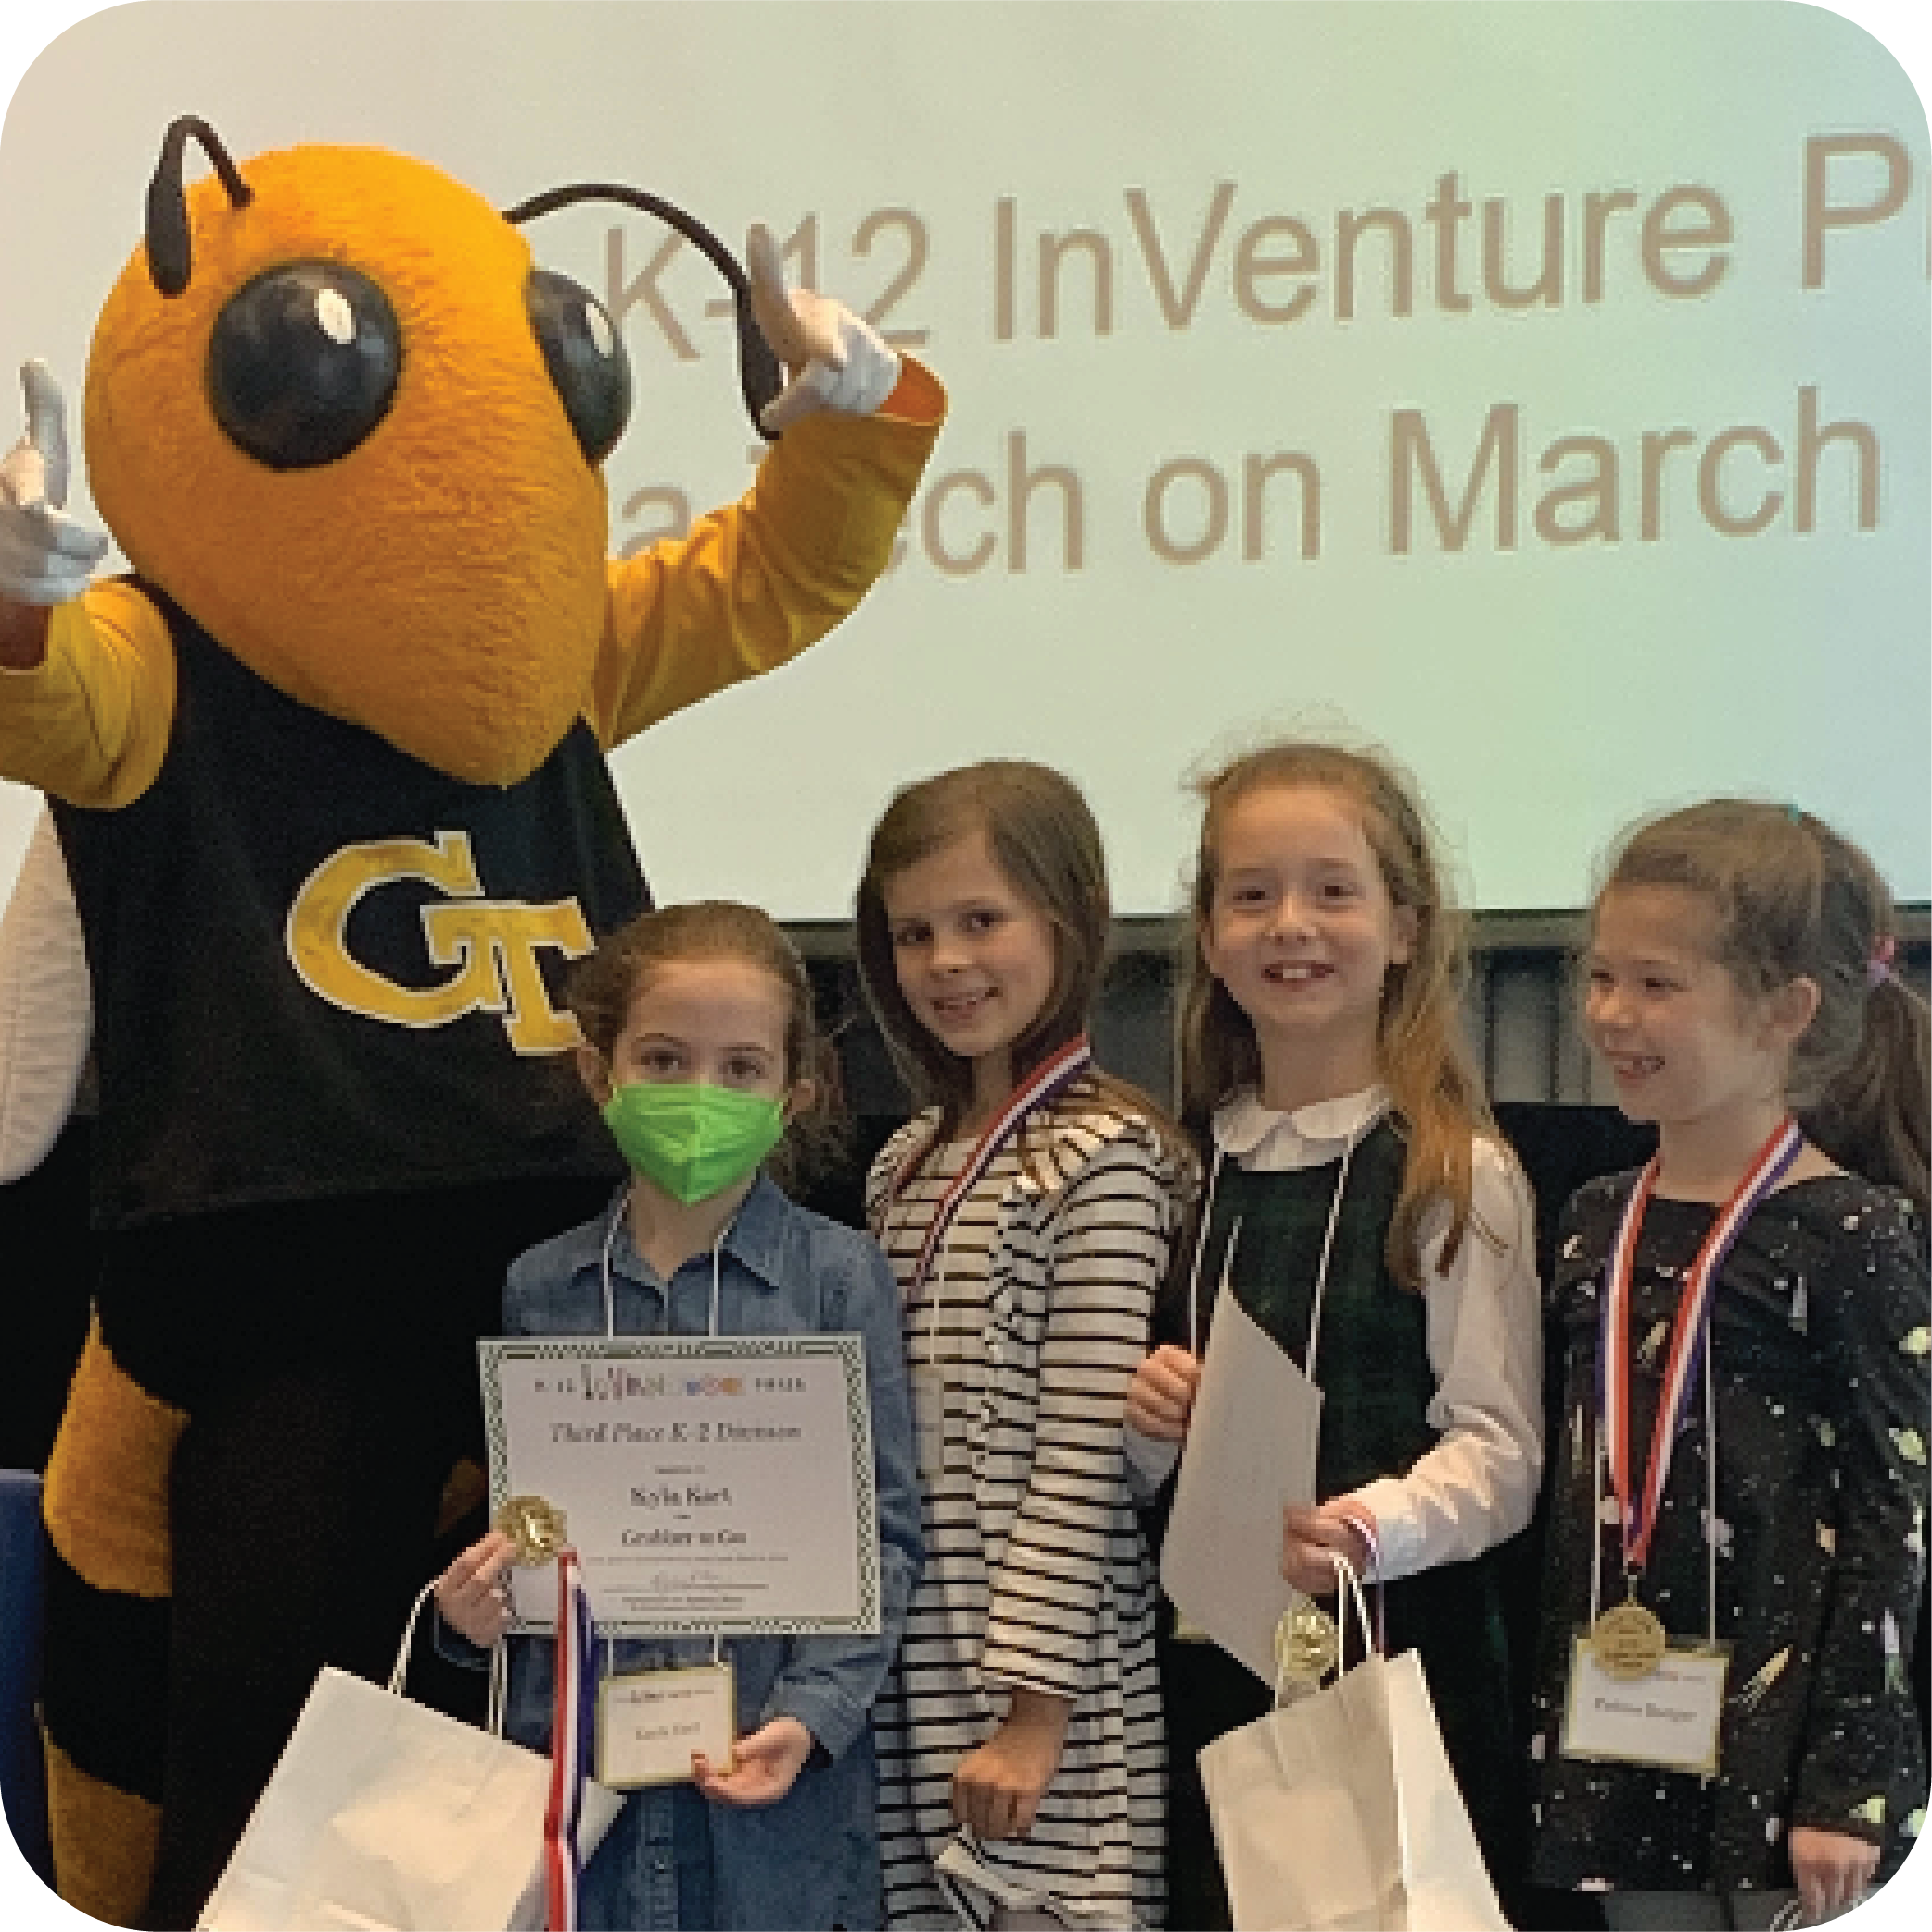 Four smiling students holding certificates and standing next to Buzz (Georgia Tech's yellowjacket mascot).